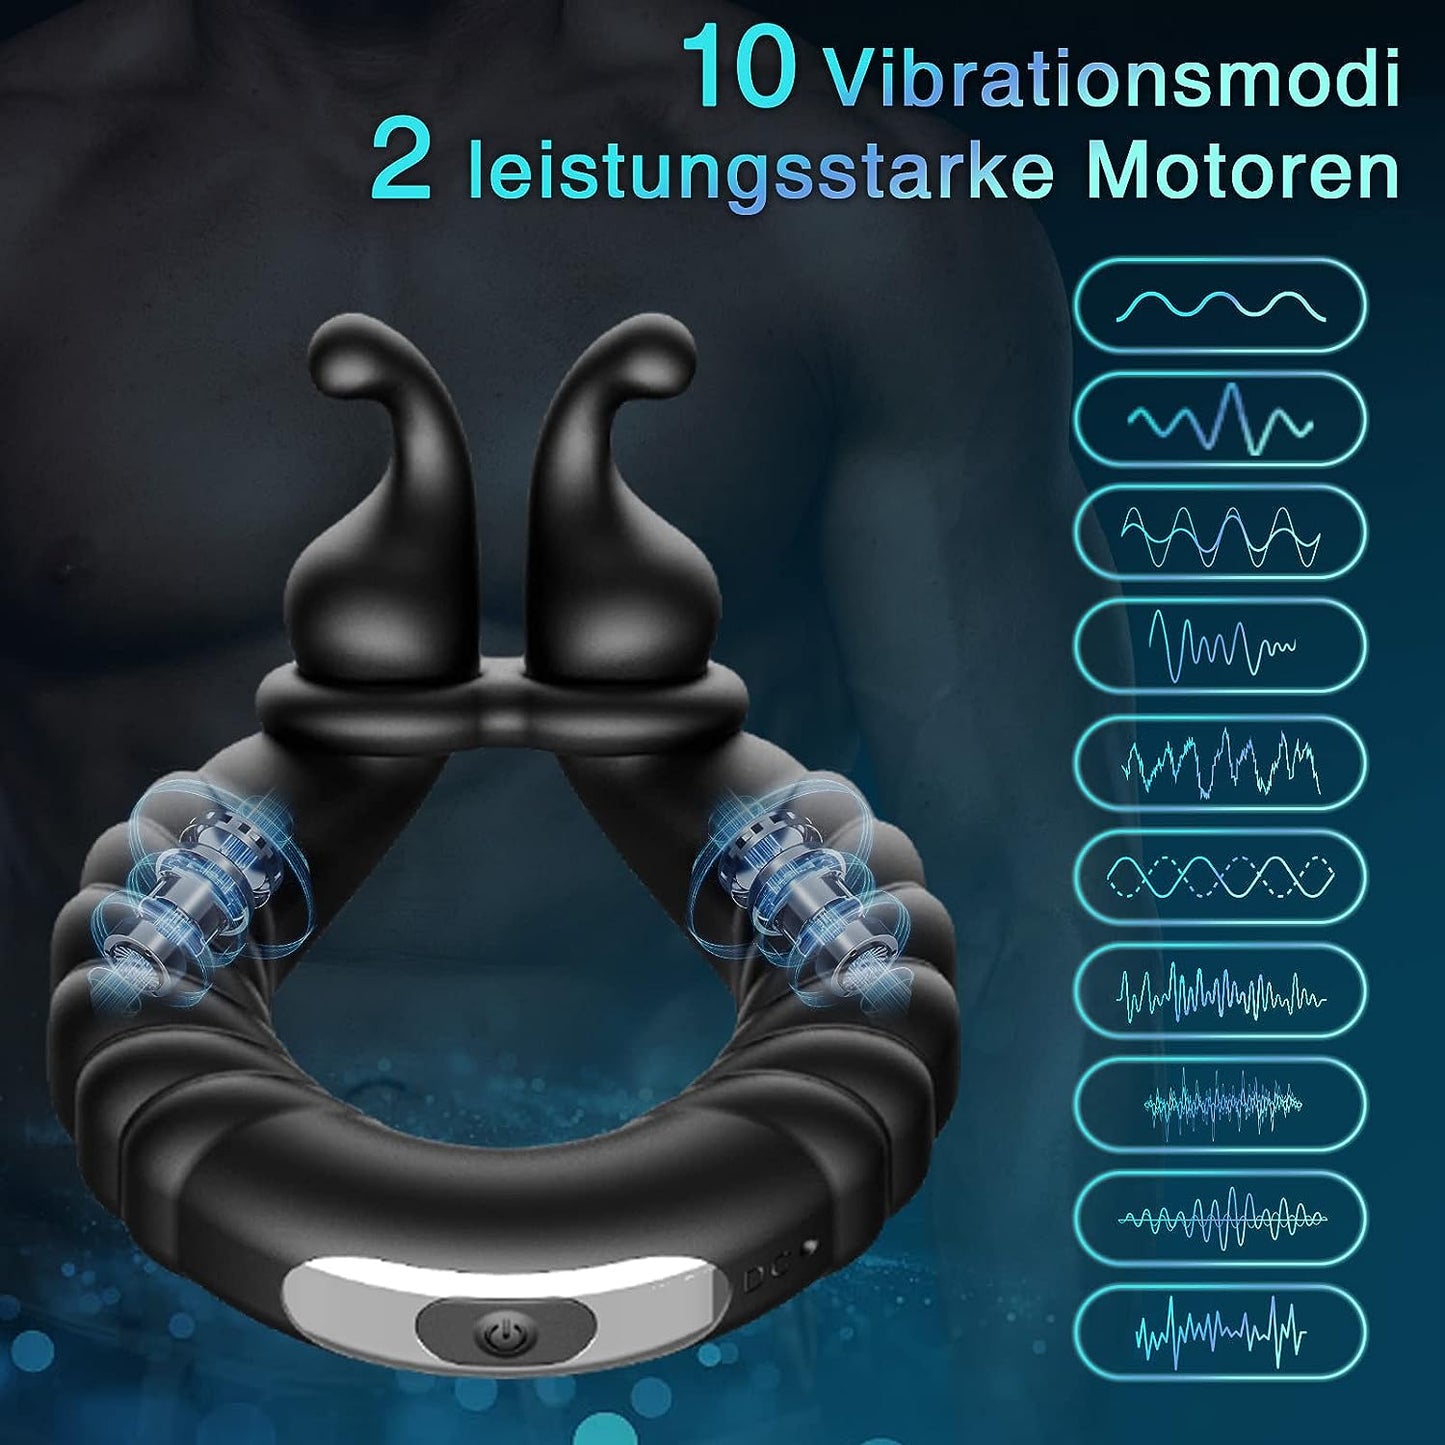 Penis ring vibrator cock ring sex toy with 10 vibration modes 